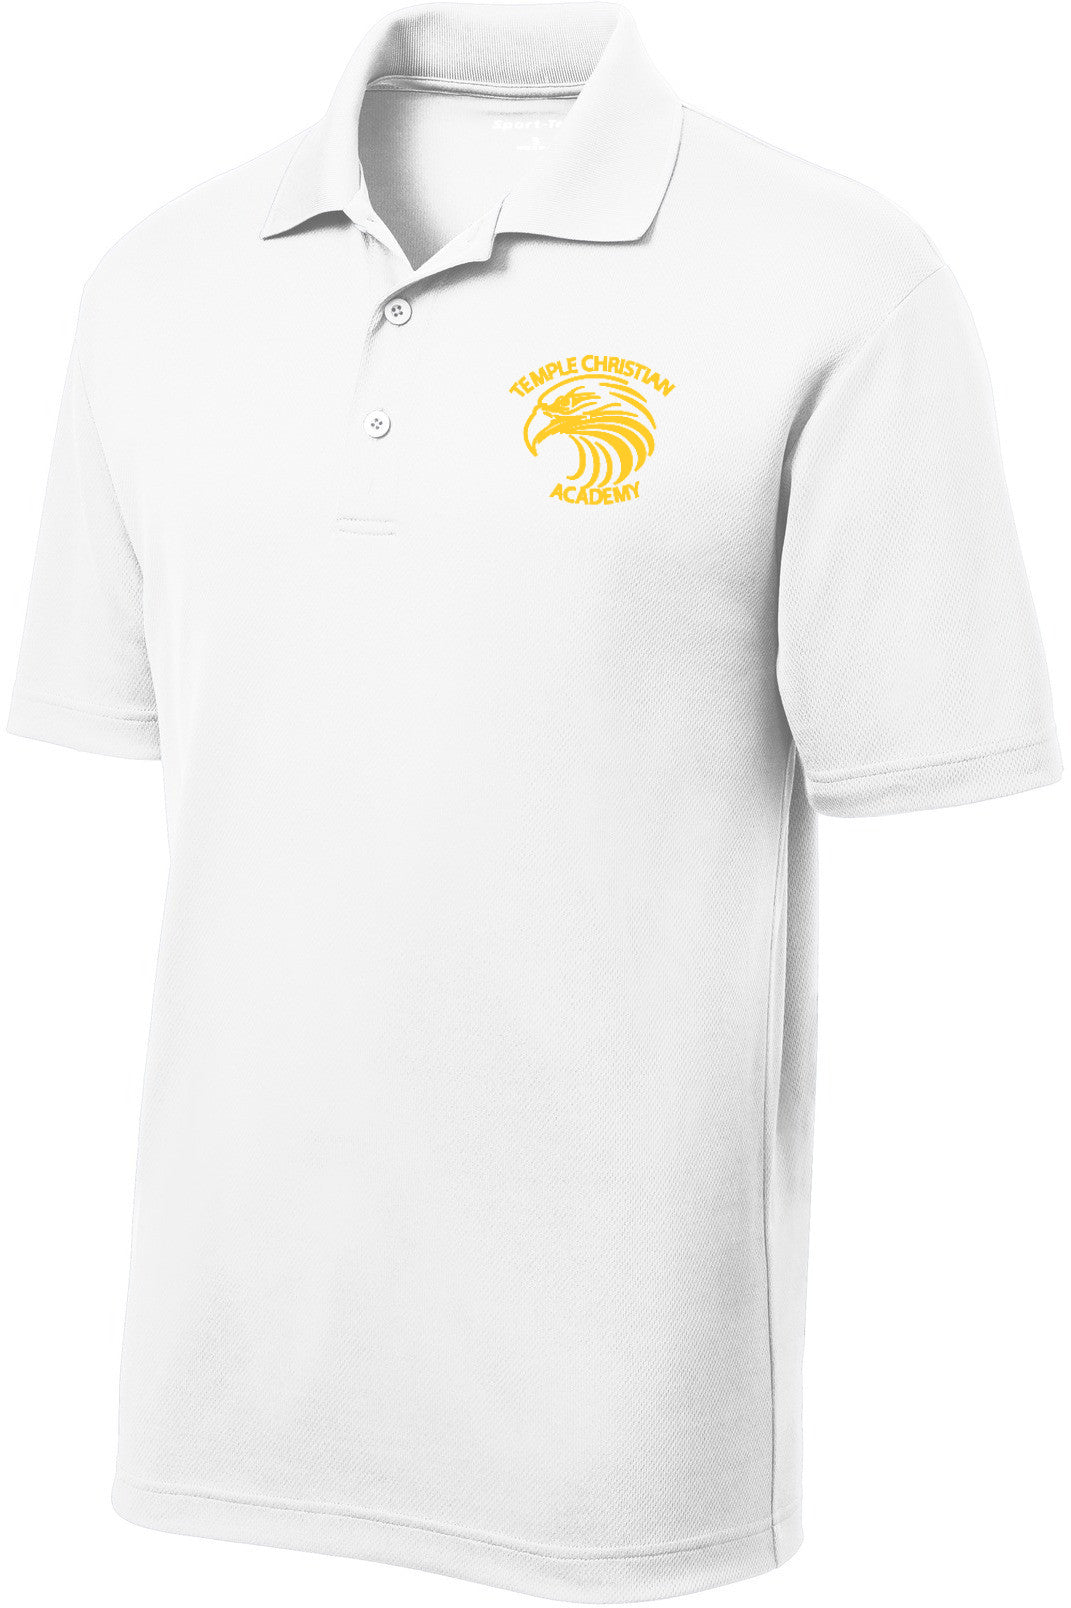 Temple Youth Racer Mesh Drifit Polo